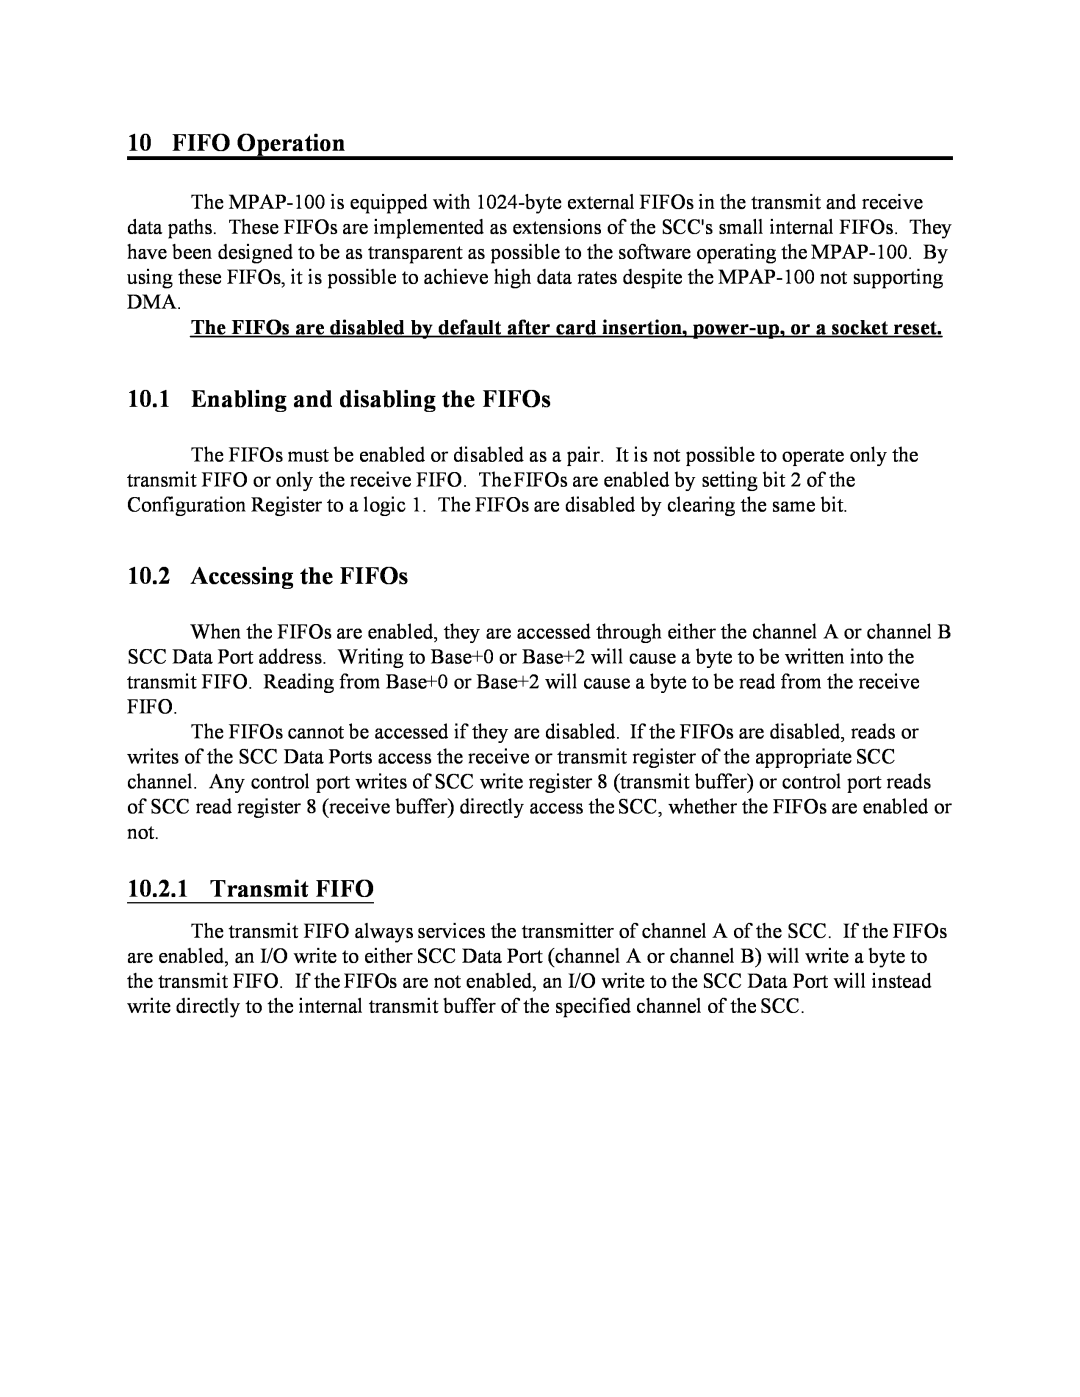 Quatech MPAP-100 user manual FIFO Operation, Enabling and disabling the FIFOs, Accessing the FIFOs, Transmit FIFO 